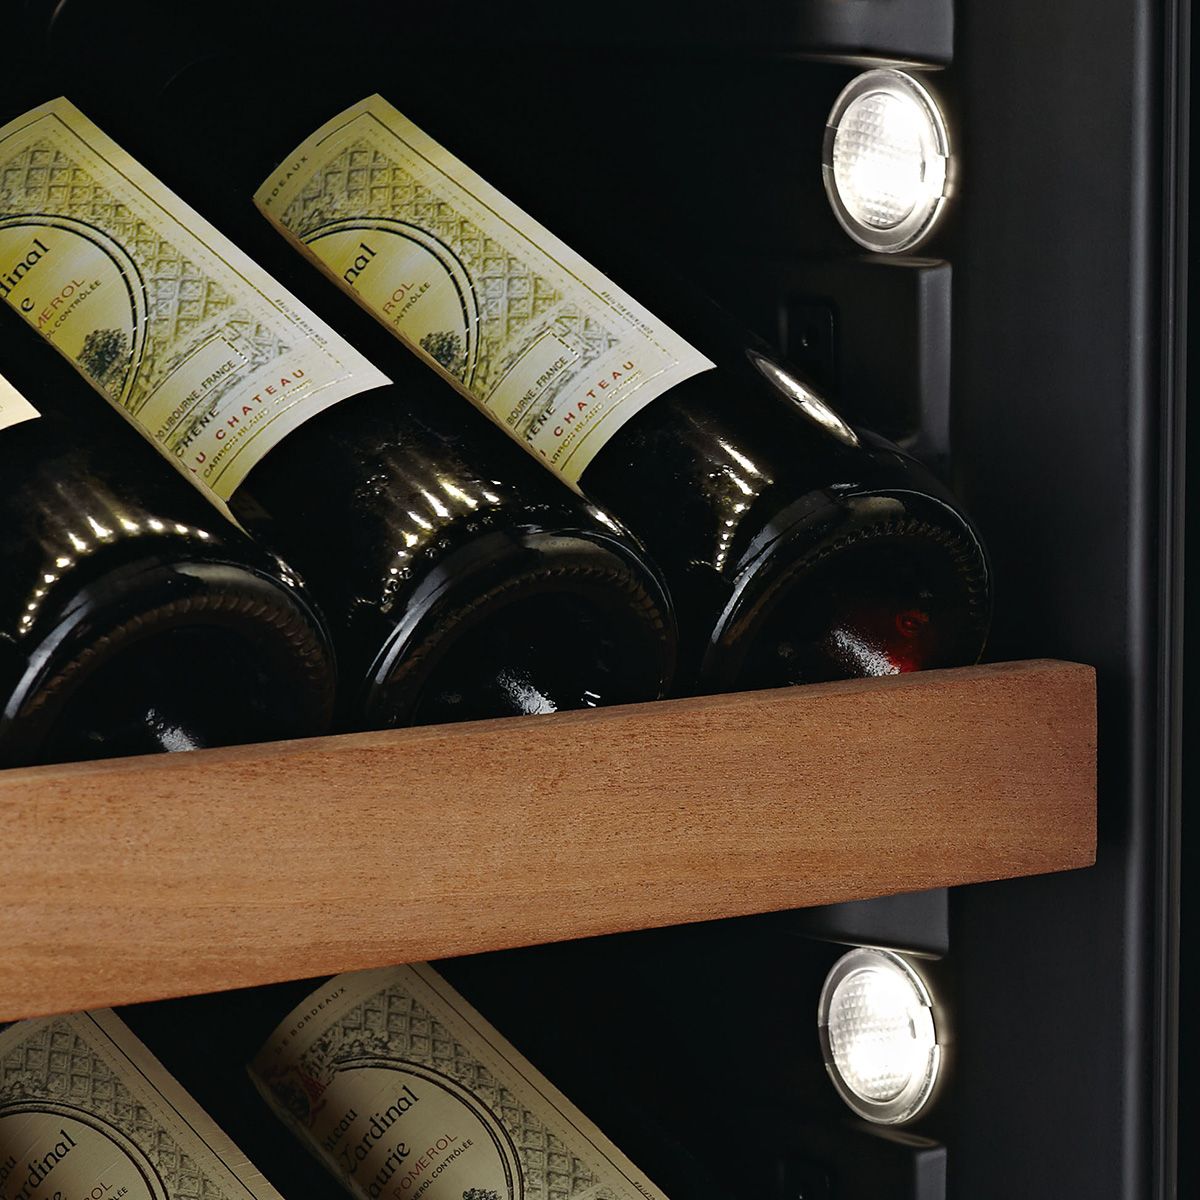 Swisscave WLB-460DFLD-MIX- Black Edition Dual Zone Wine Cabinet with Gastro Furnishing (124-163 BOT) - 595mm Wide